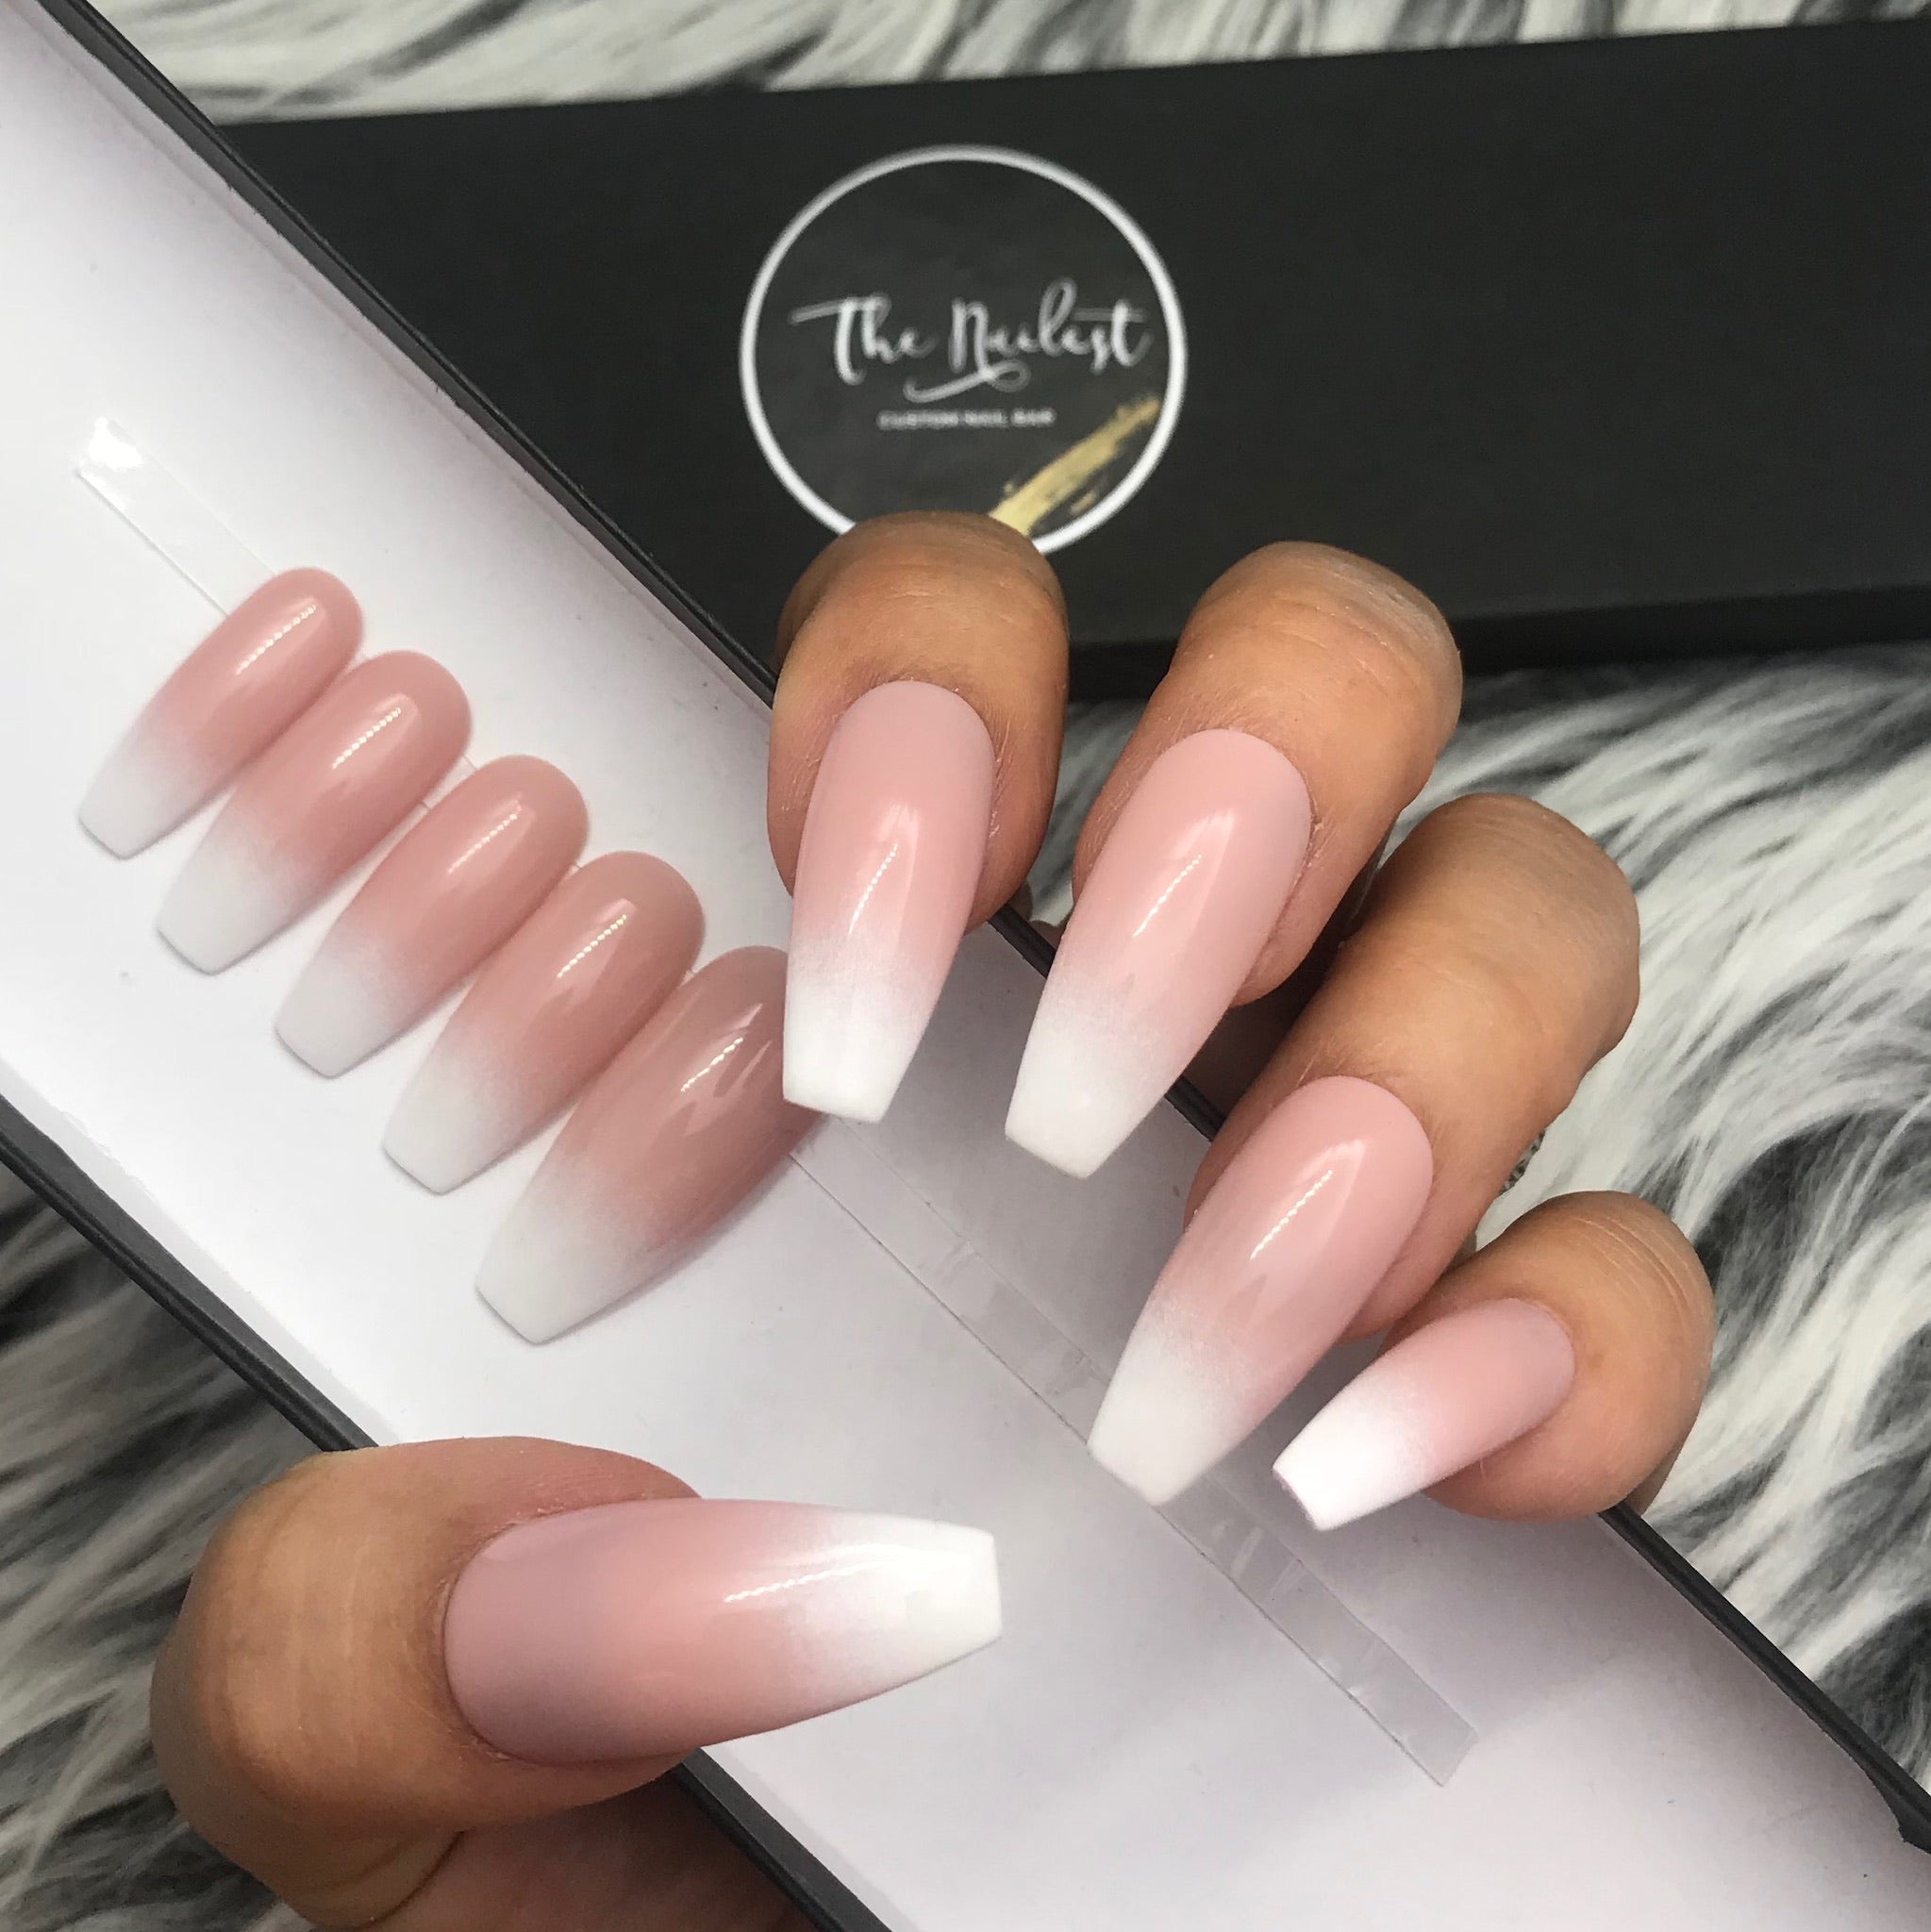 Pink and white ombre nails : r/DIYGelNails